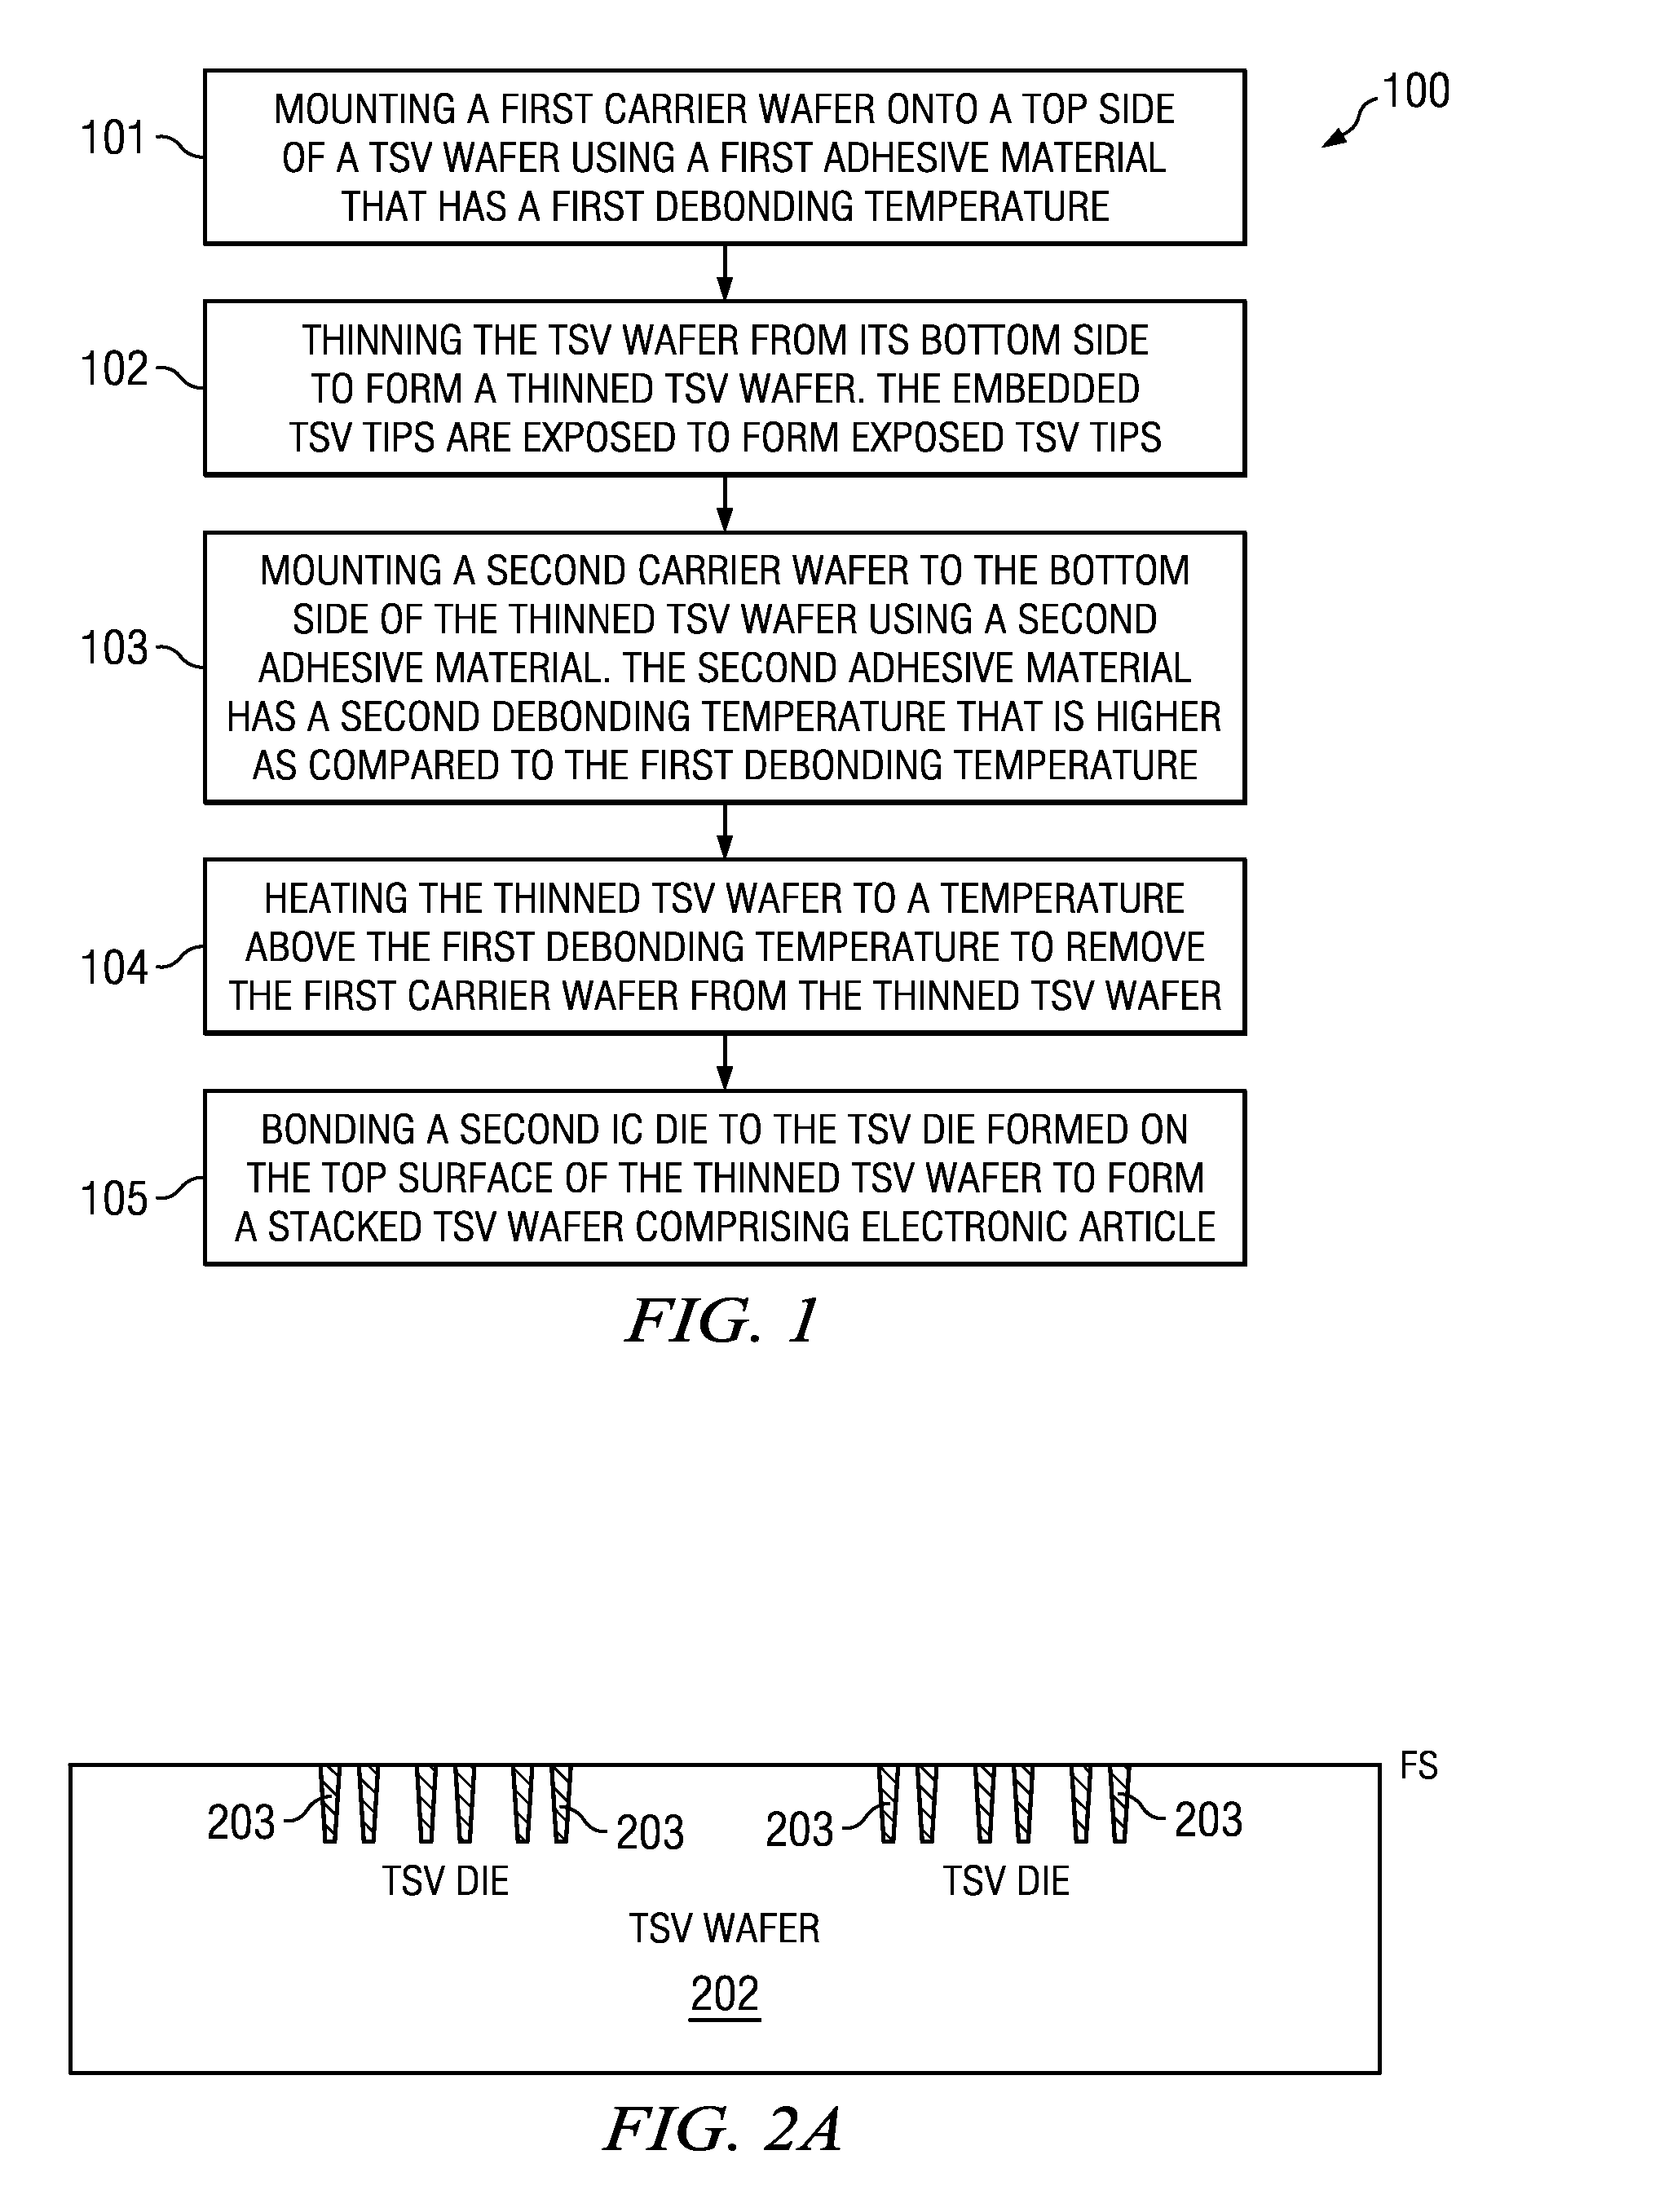 Dual carrier for joining IC die or wafers to TSV wafers